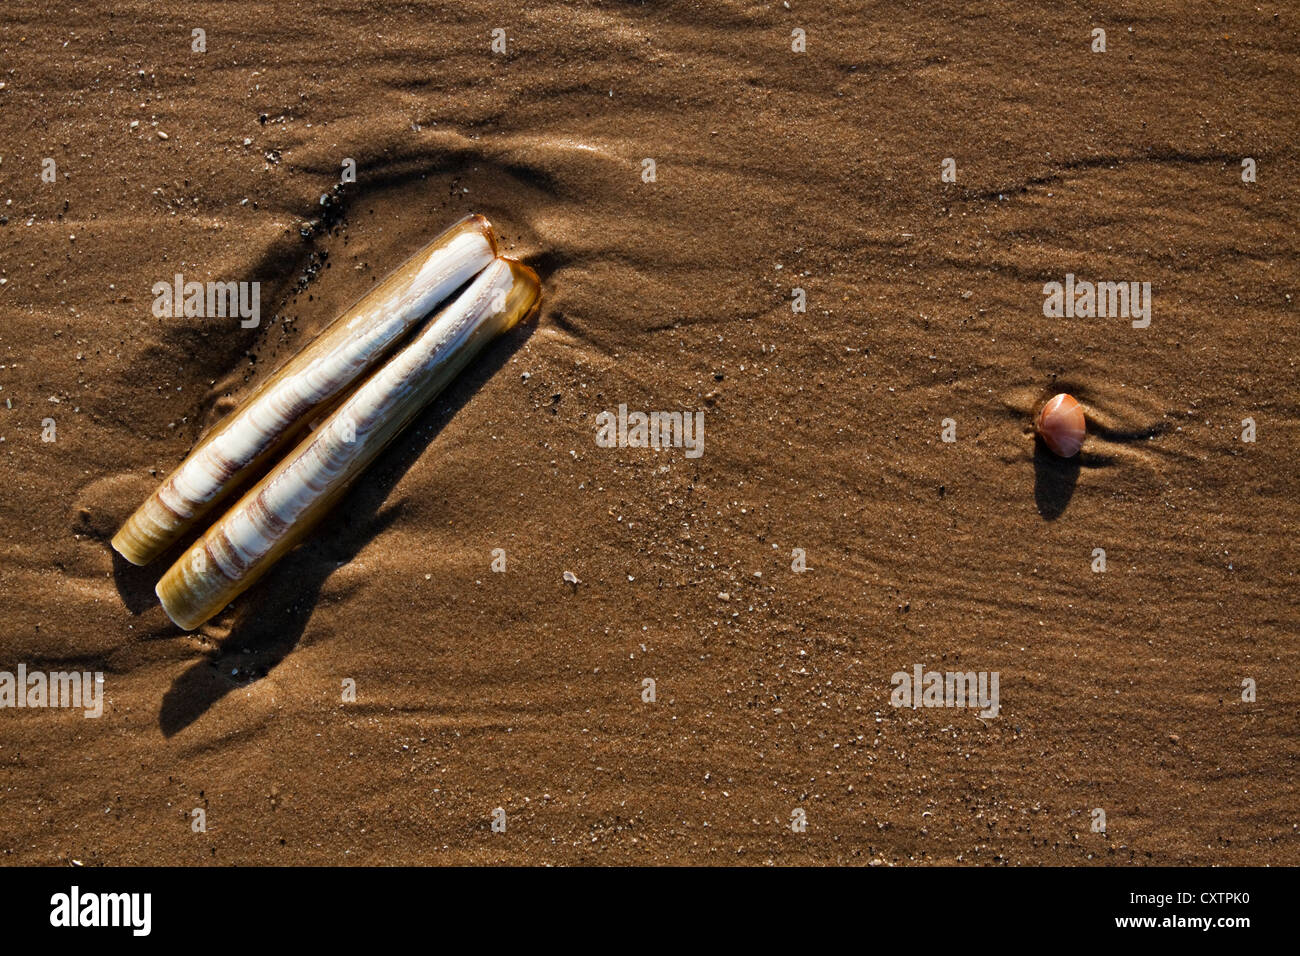 Razor Shell washed up on a beach Stock Photo